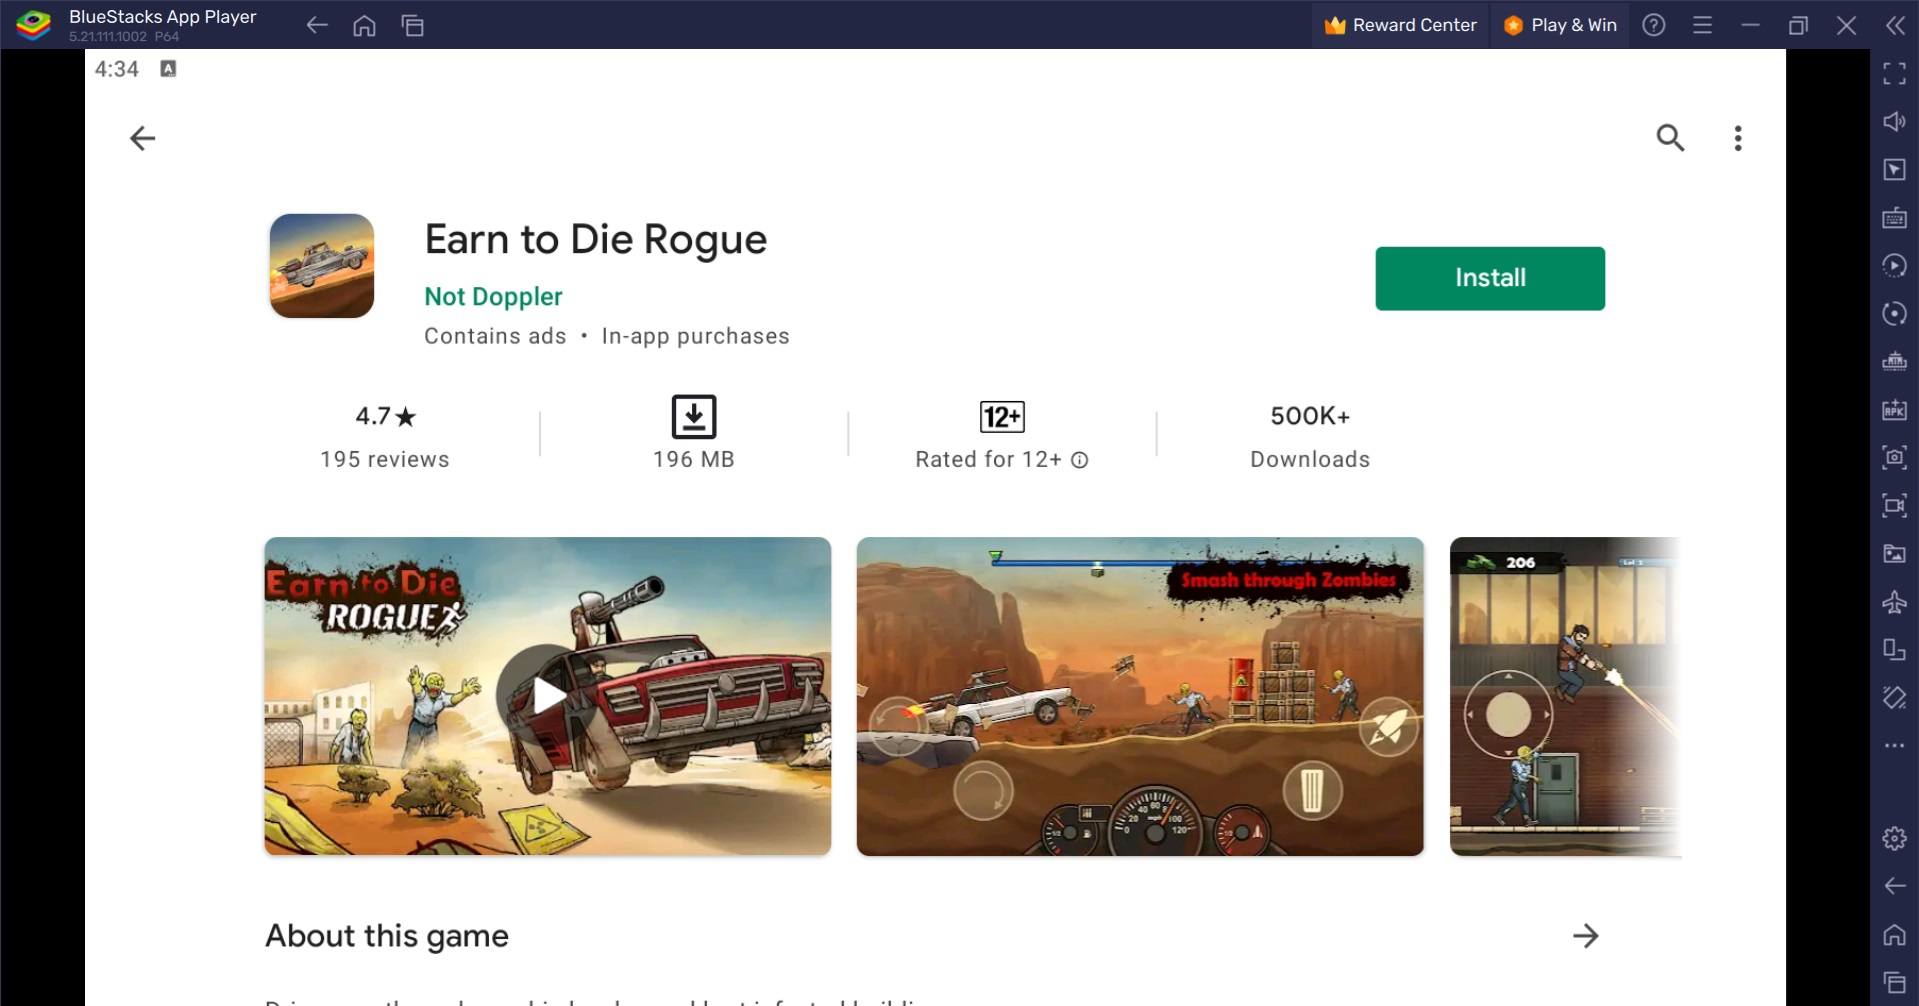 How to Play Earn to Die Rogue on PC with BlueStacks